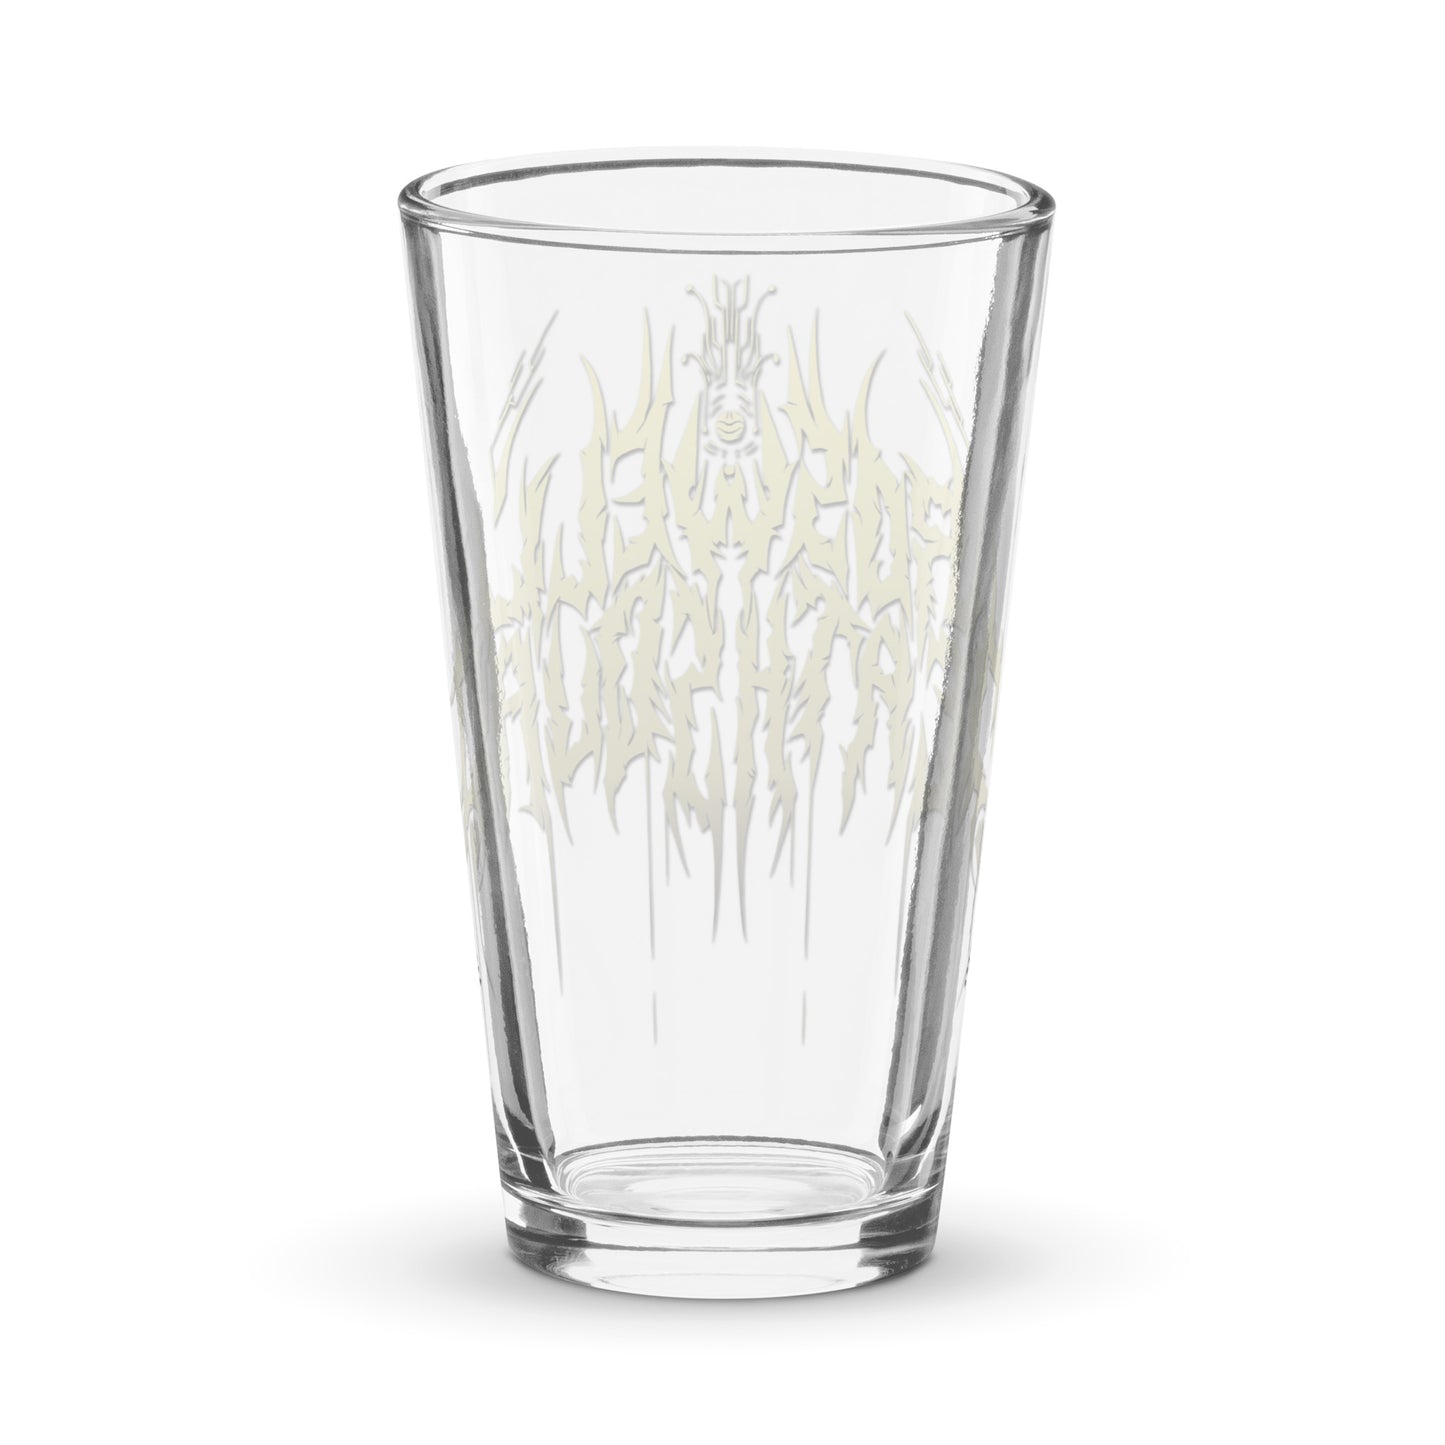 Roswell Deathsquad Pint Glass